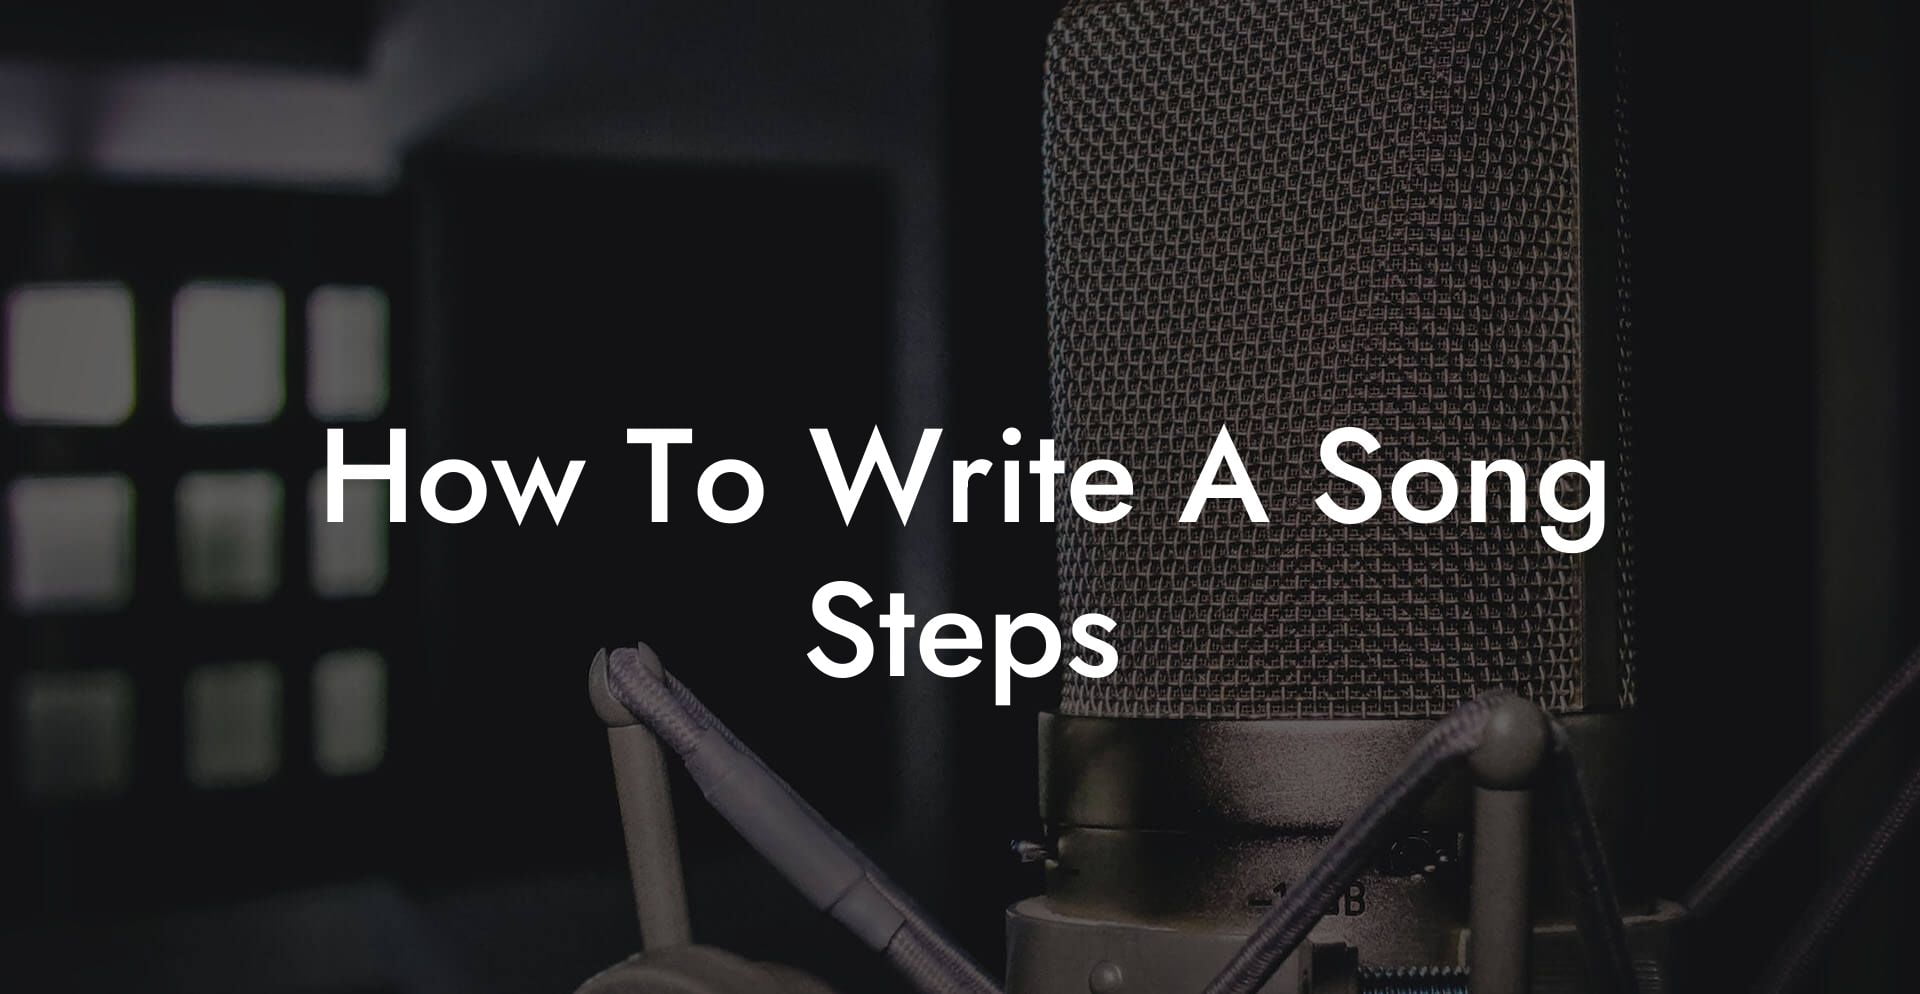 how to write a song steps lyric assistant